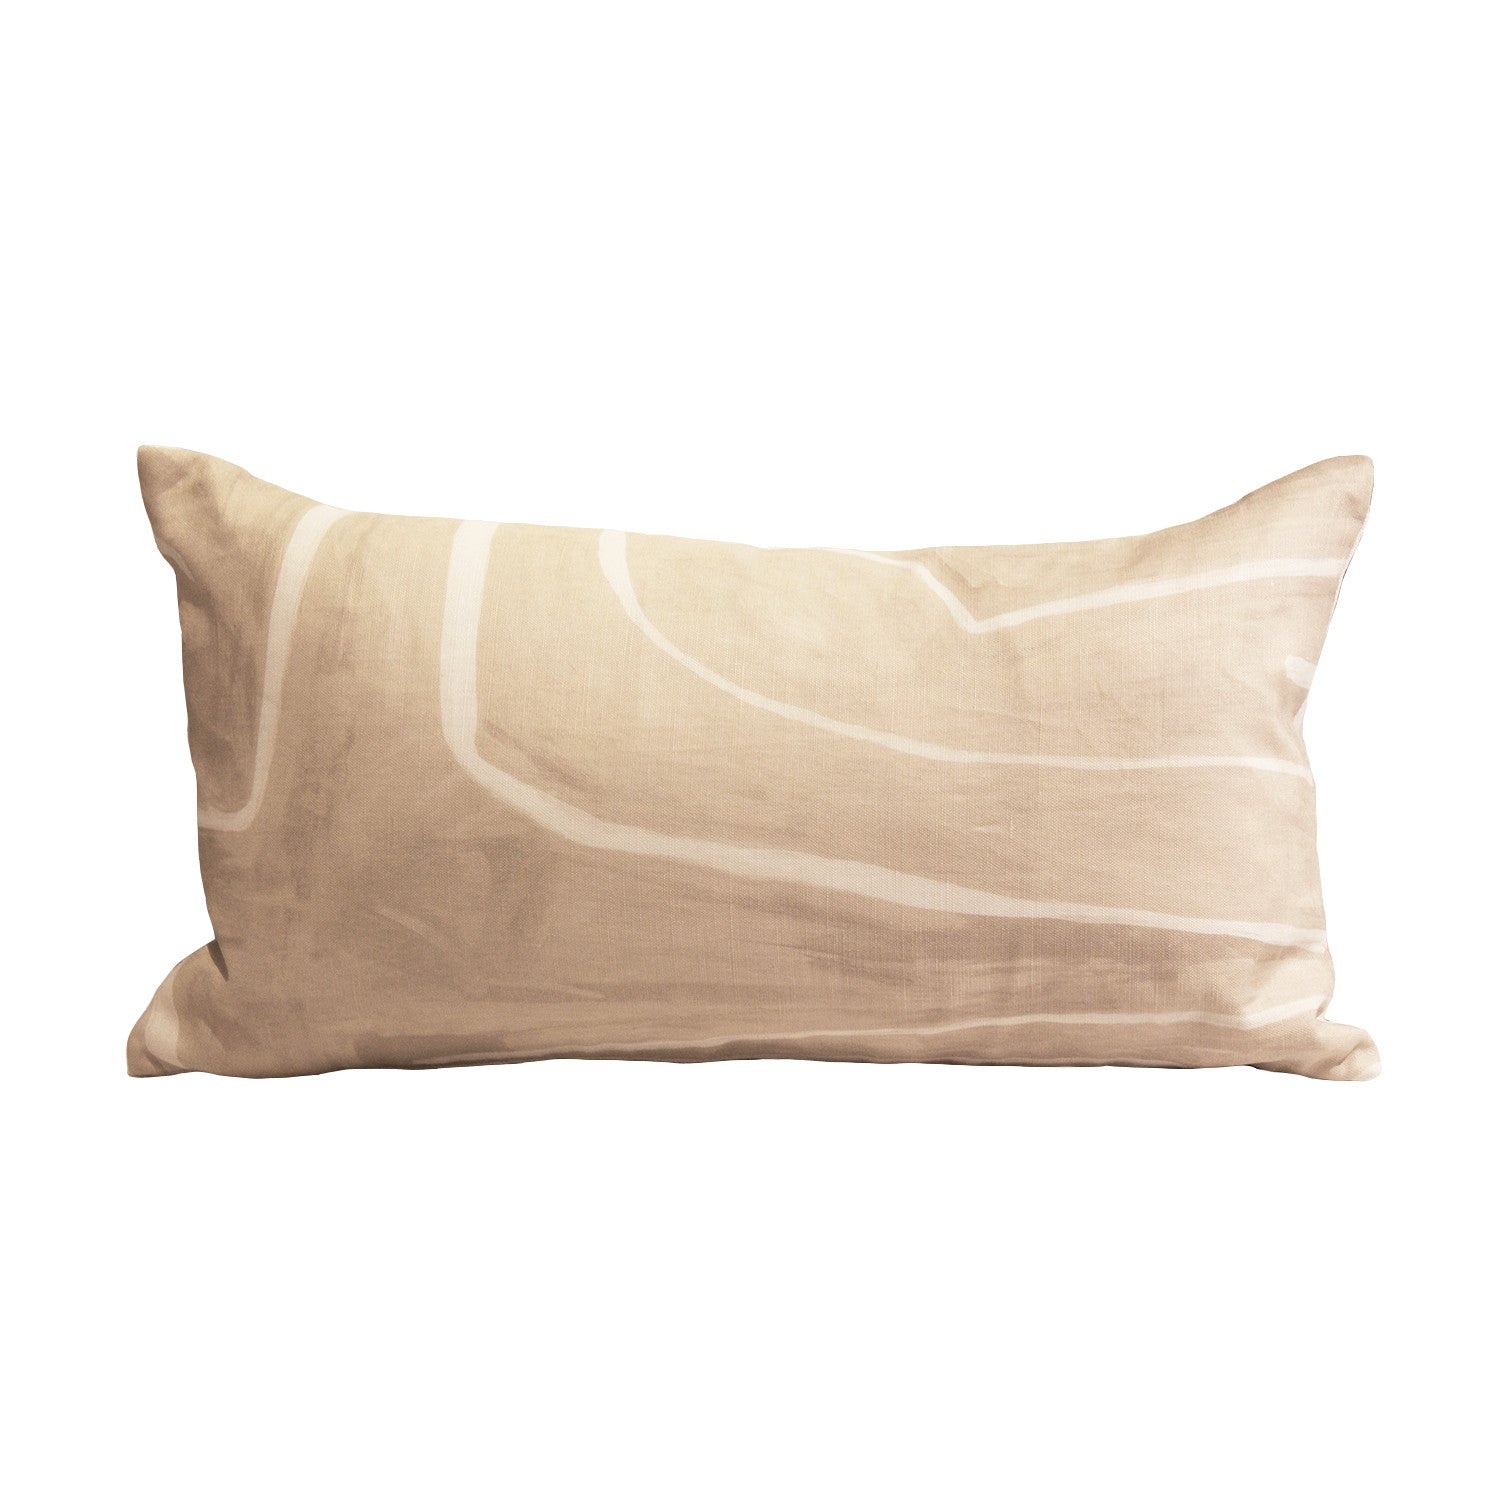 Kelly Wearstler cream and white linen pillow combines playful lines with formal finish.   